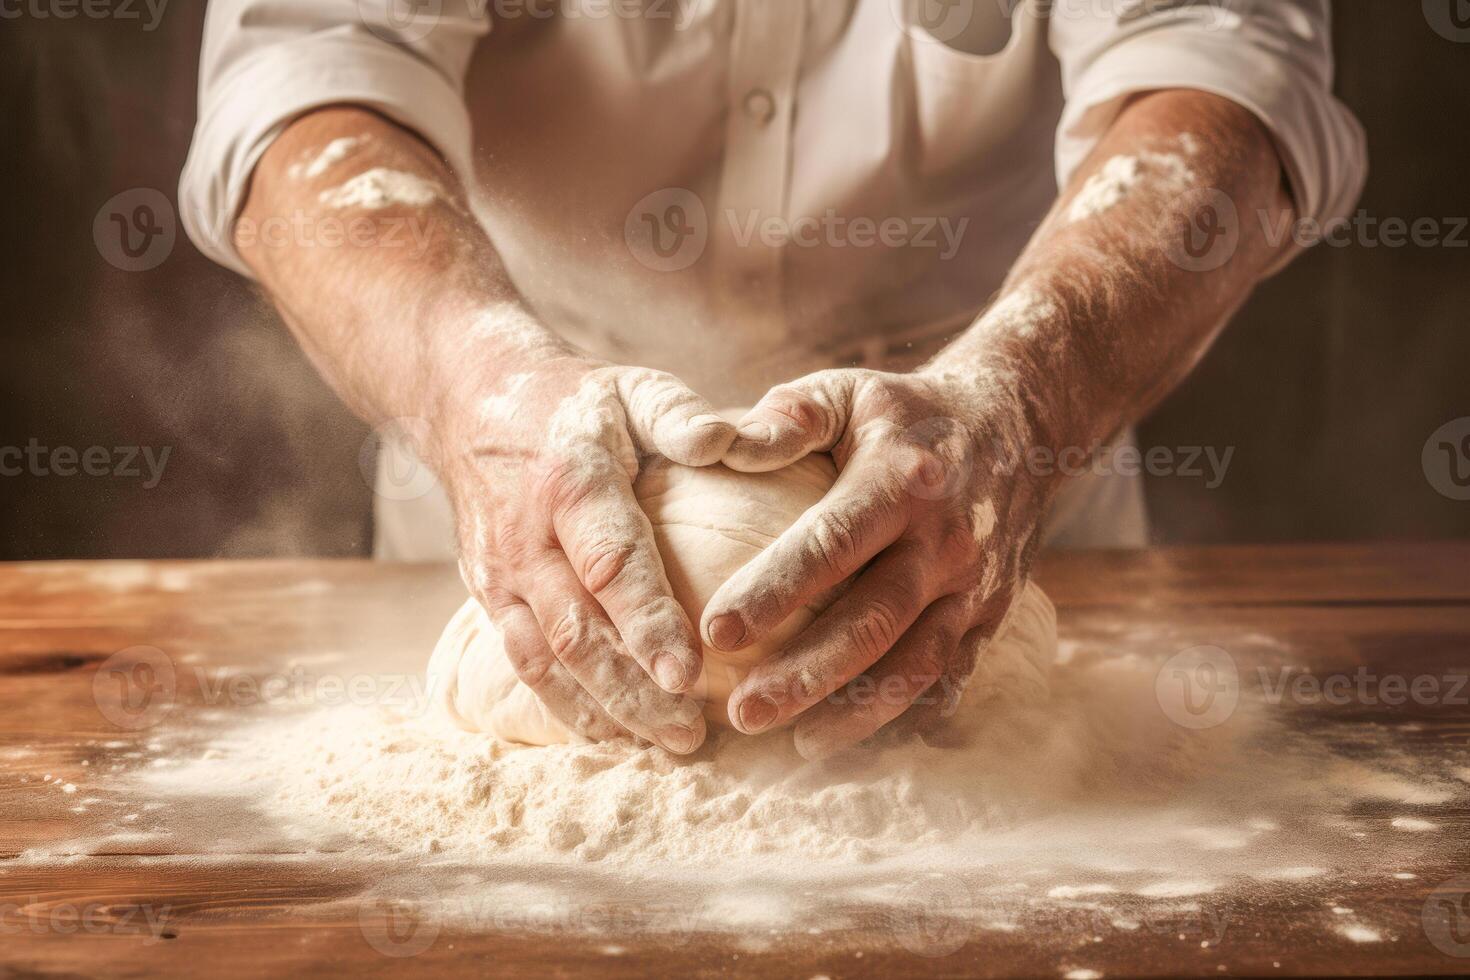 The chef's manly hands kneading the dough. photo